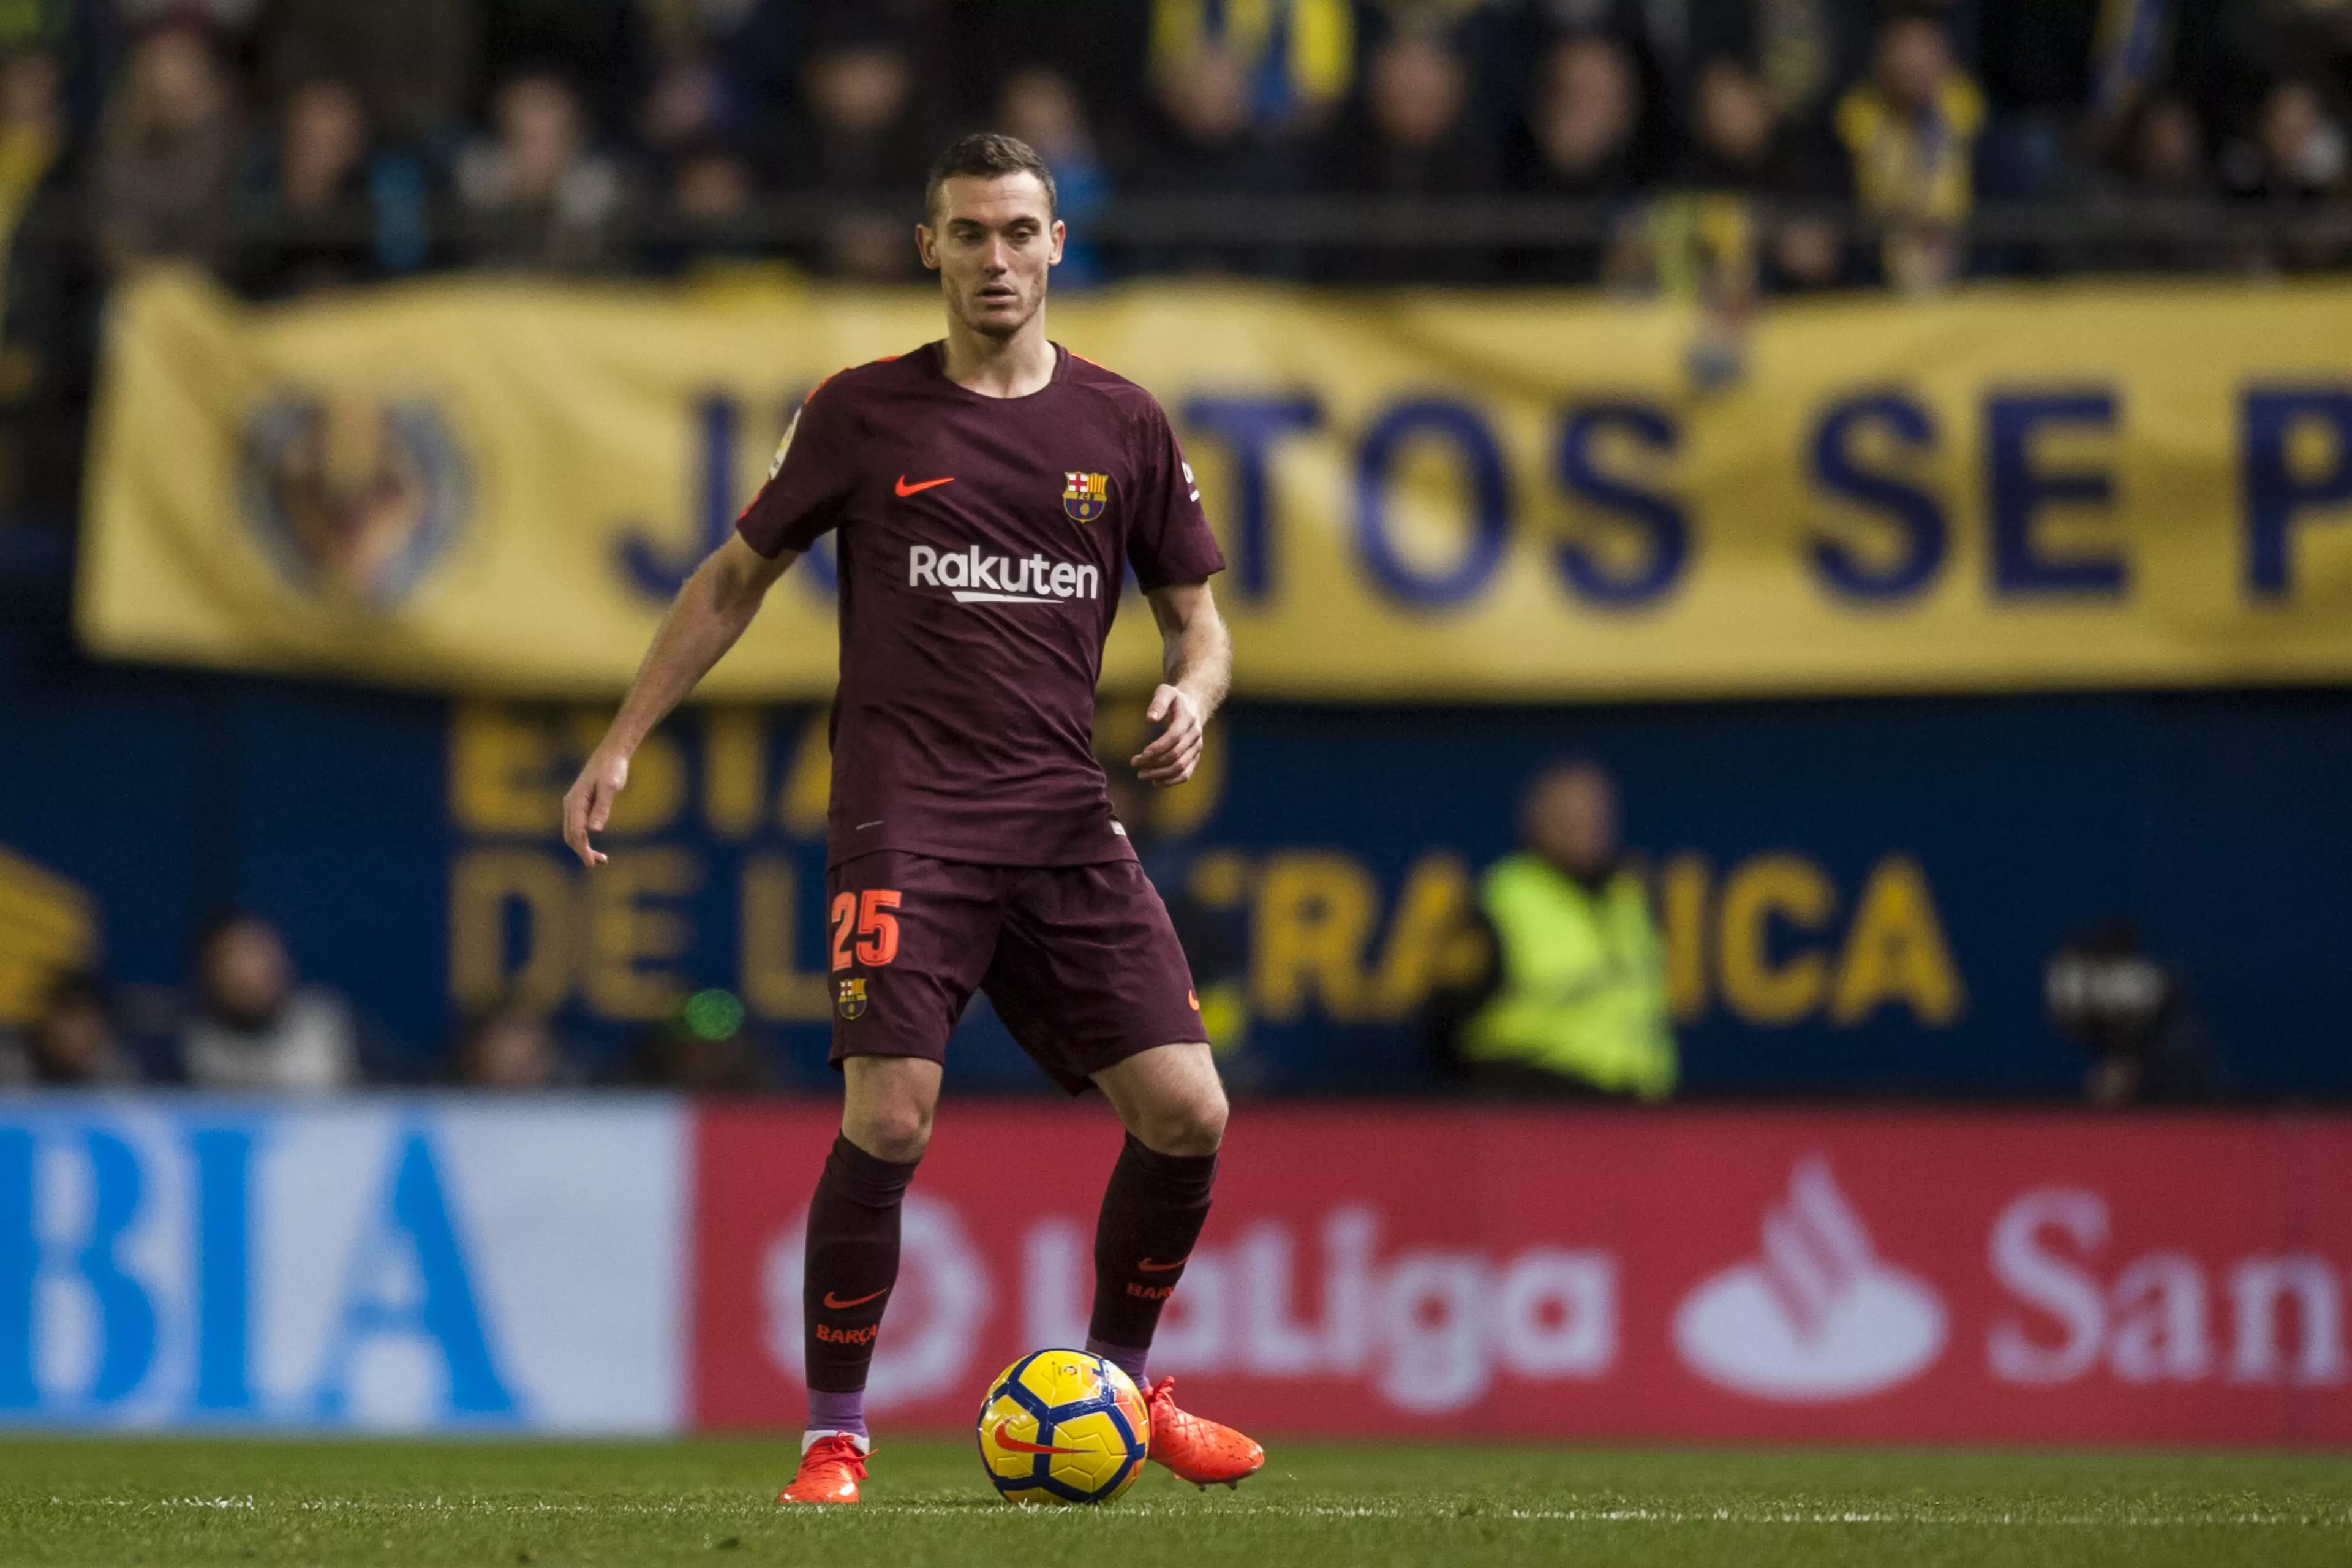 Opposition attackers must be easy for Vermaelen to face. Image: PA Images.